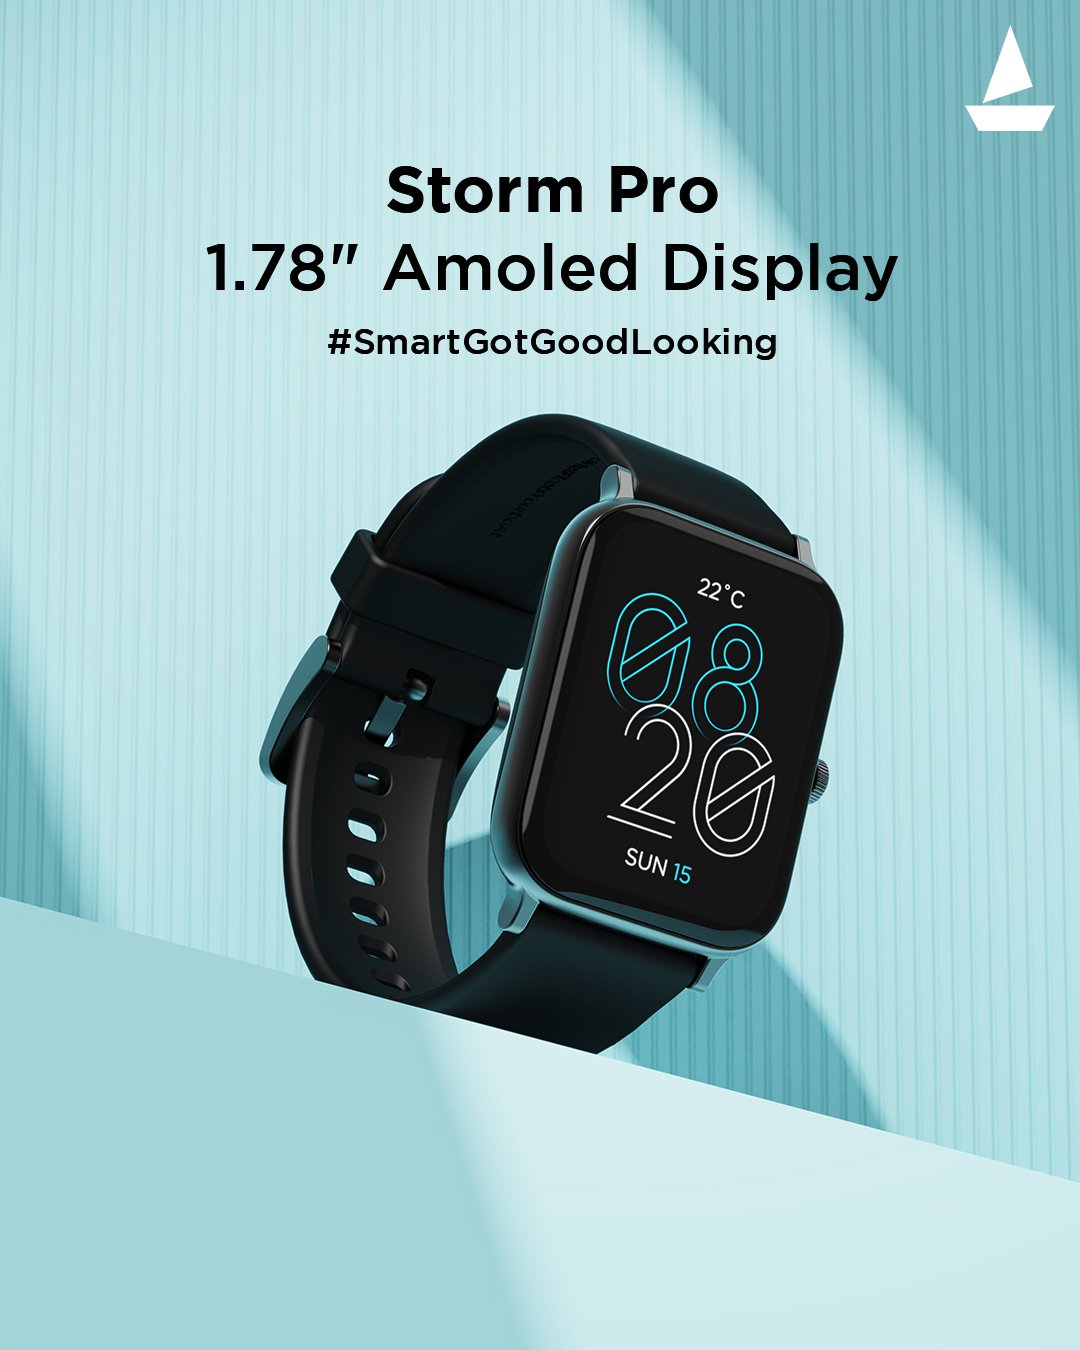 Boat launches Storm Pro smartwatch with 700+ fitness modes at Rs 2,999